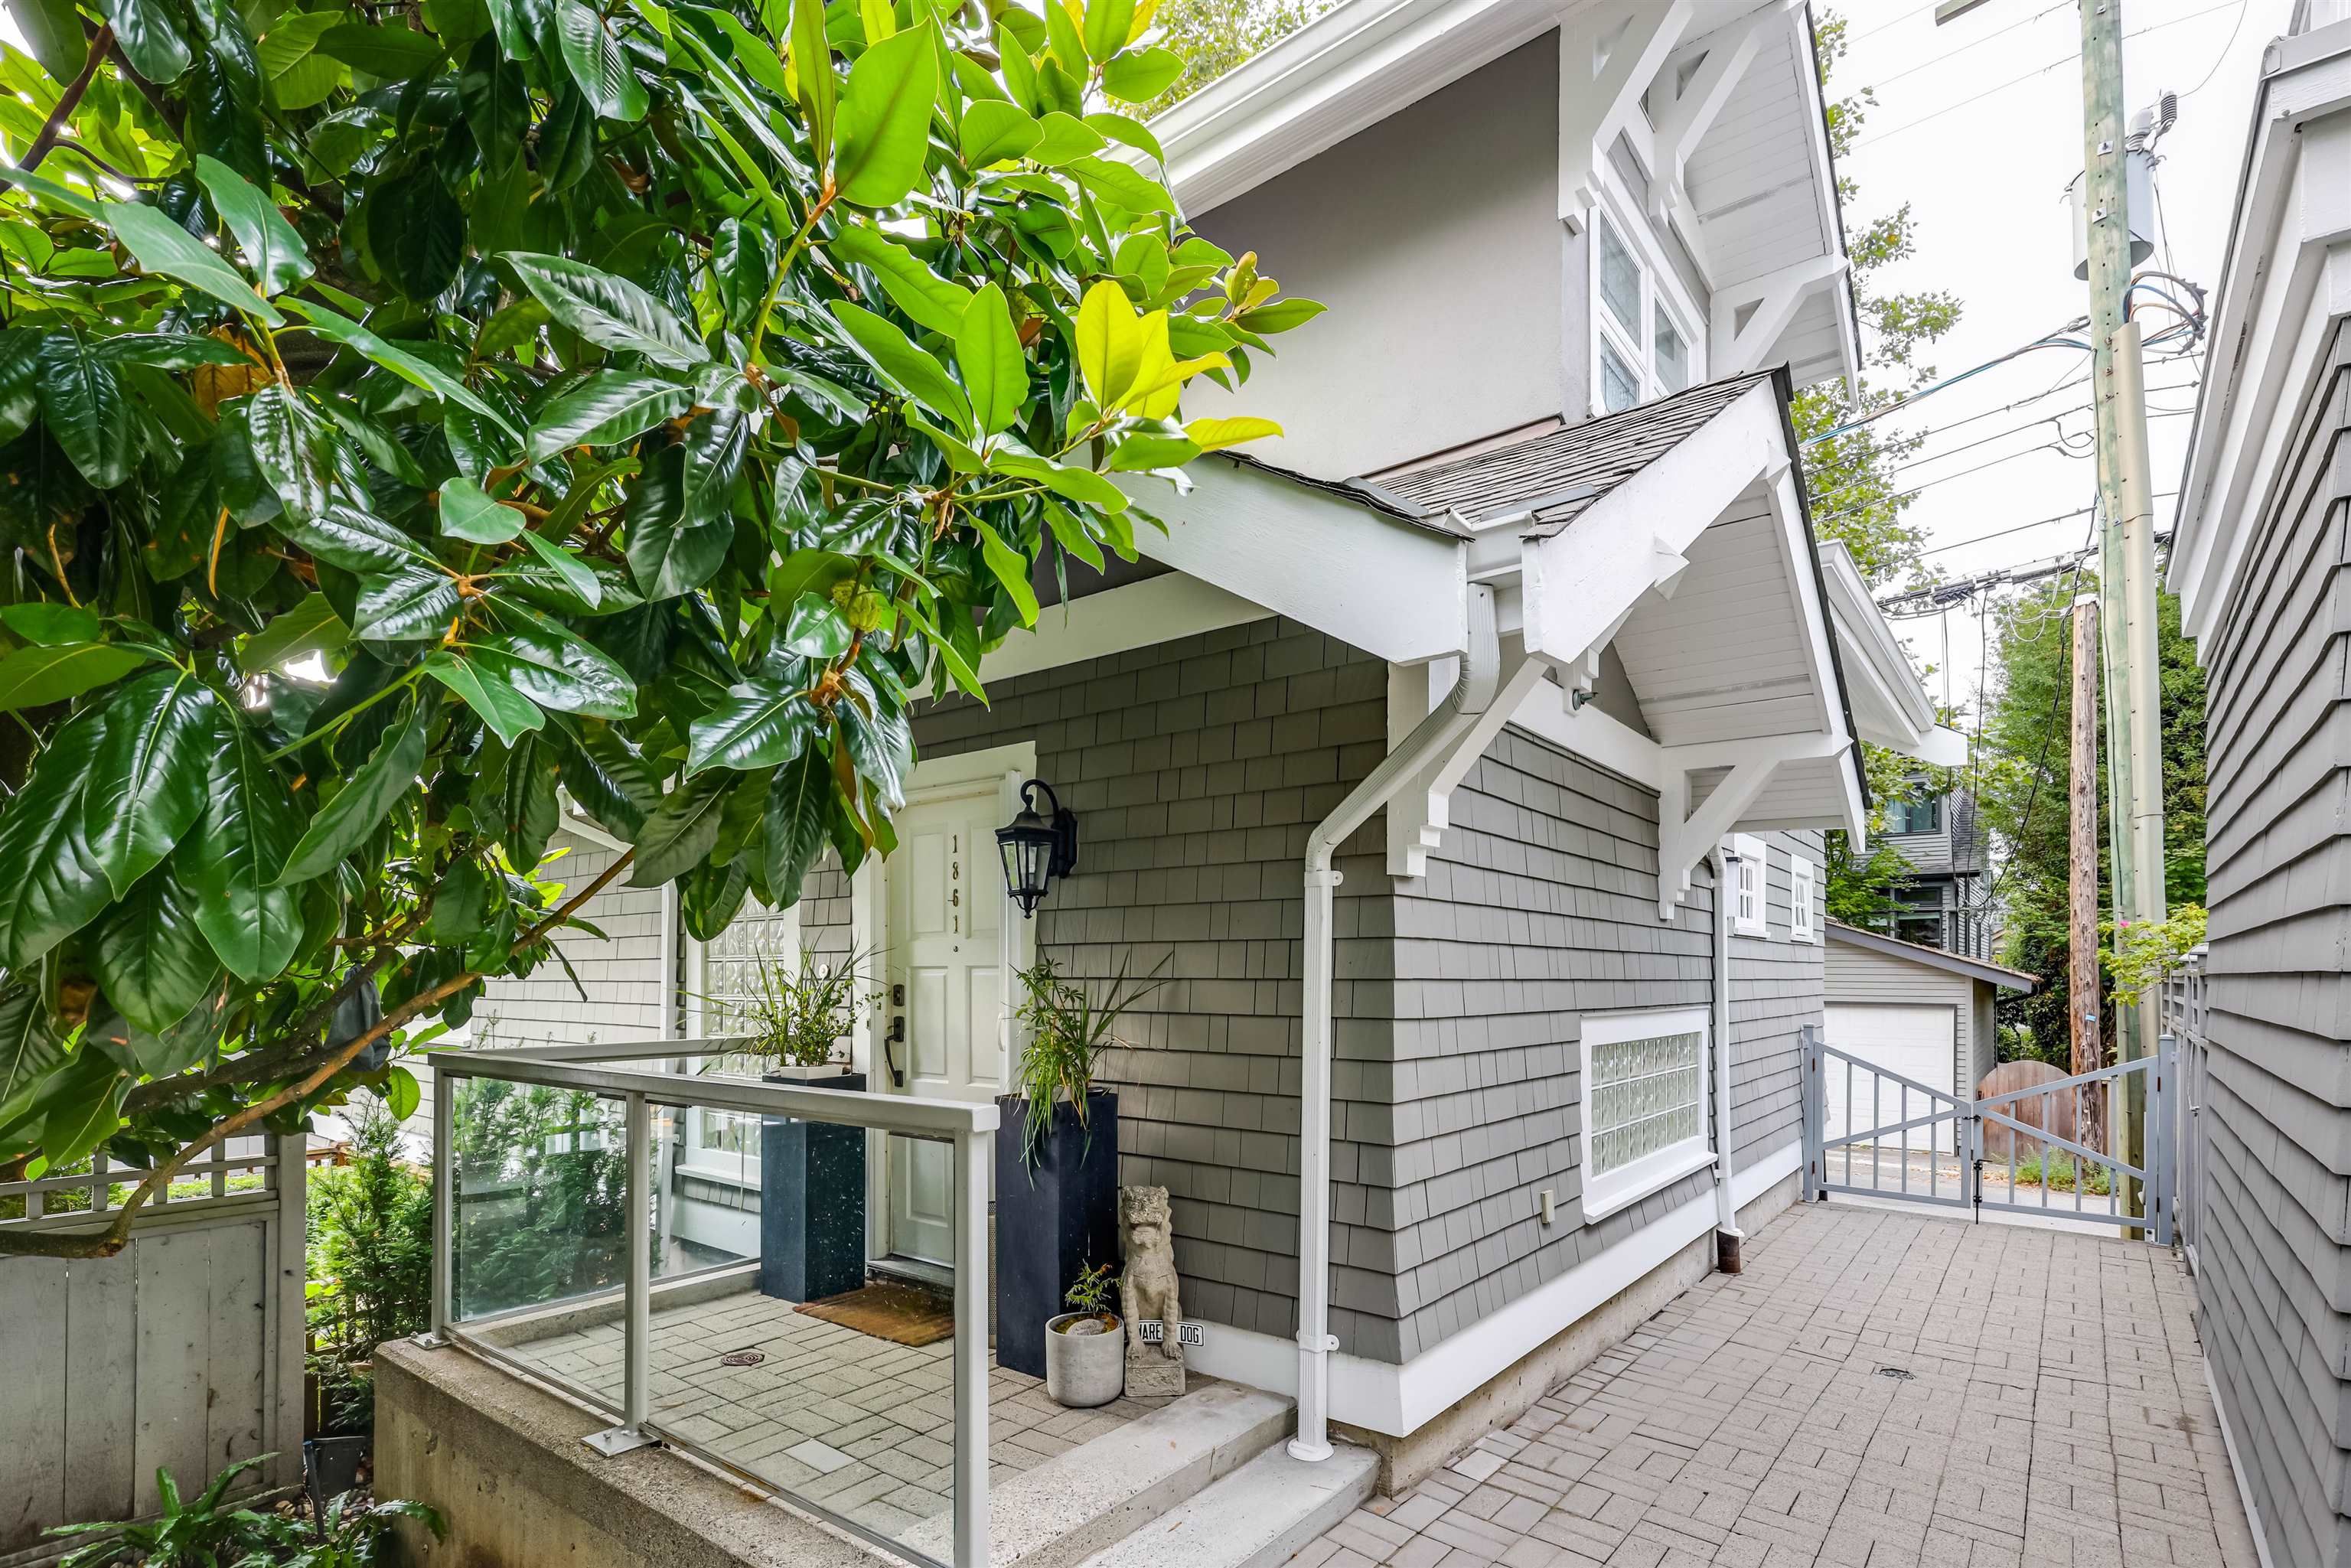 I have sold a property at 1861 16TH AVE W in Vancouver
